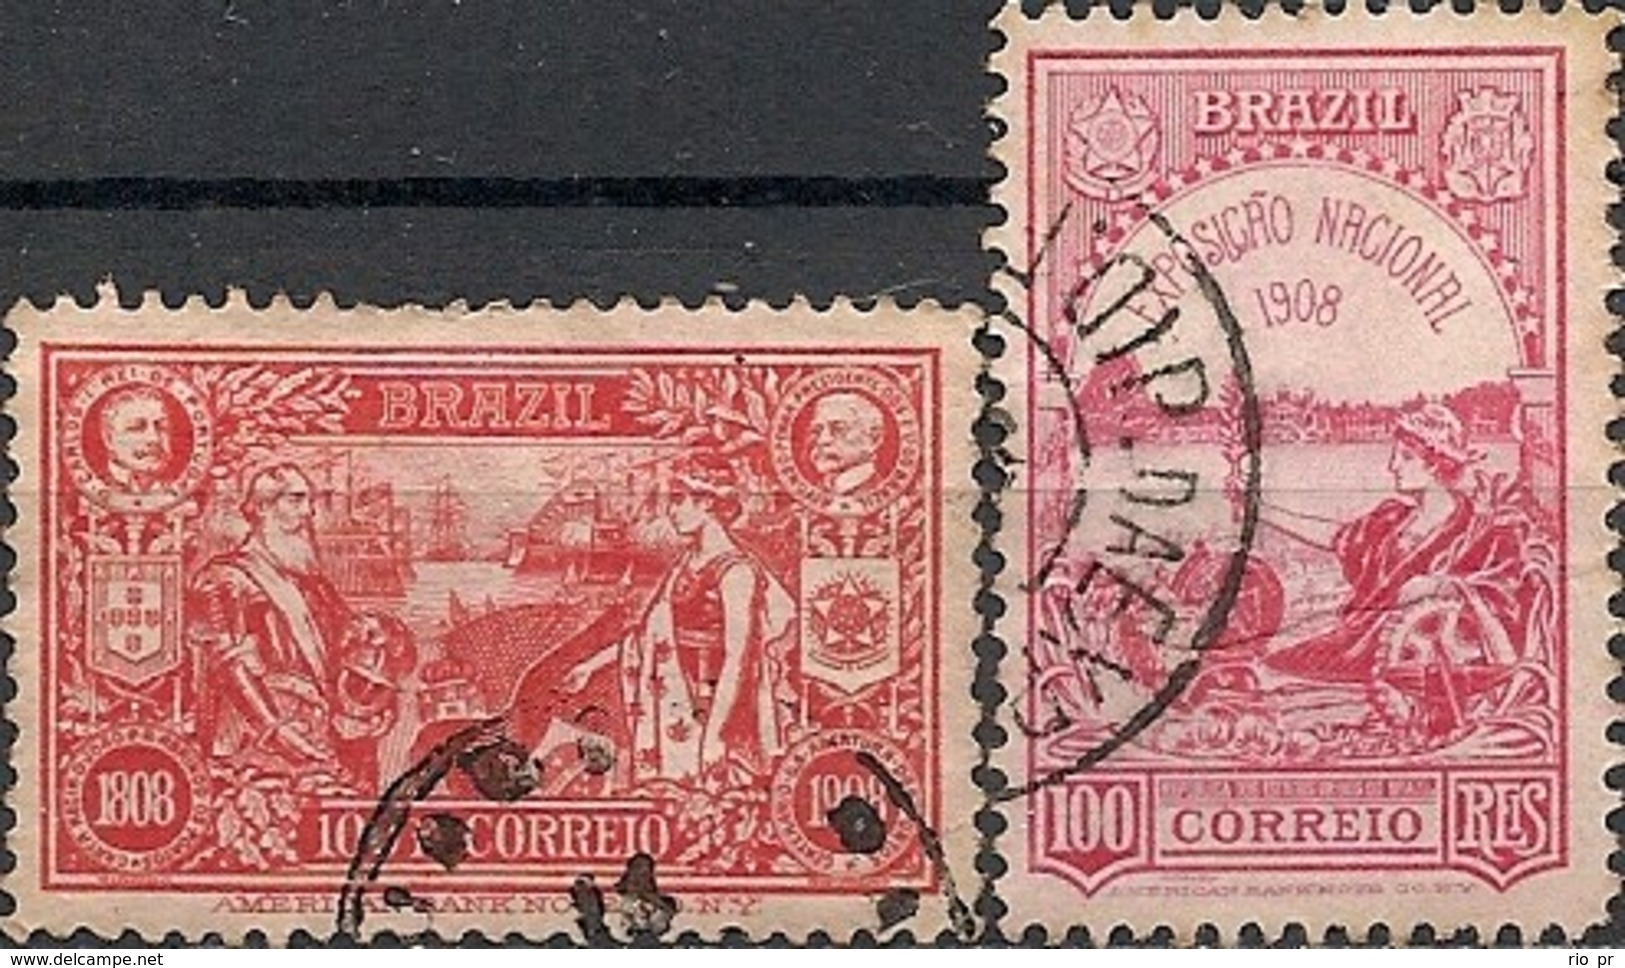 BRAZIL - COMPLETE SET OPENNING OF BRAZILIAN PORTS TO COMMERCE 1908 - USED - Oblitérés